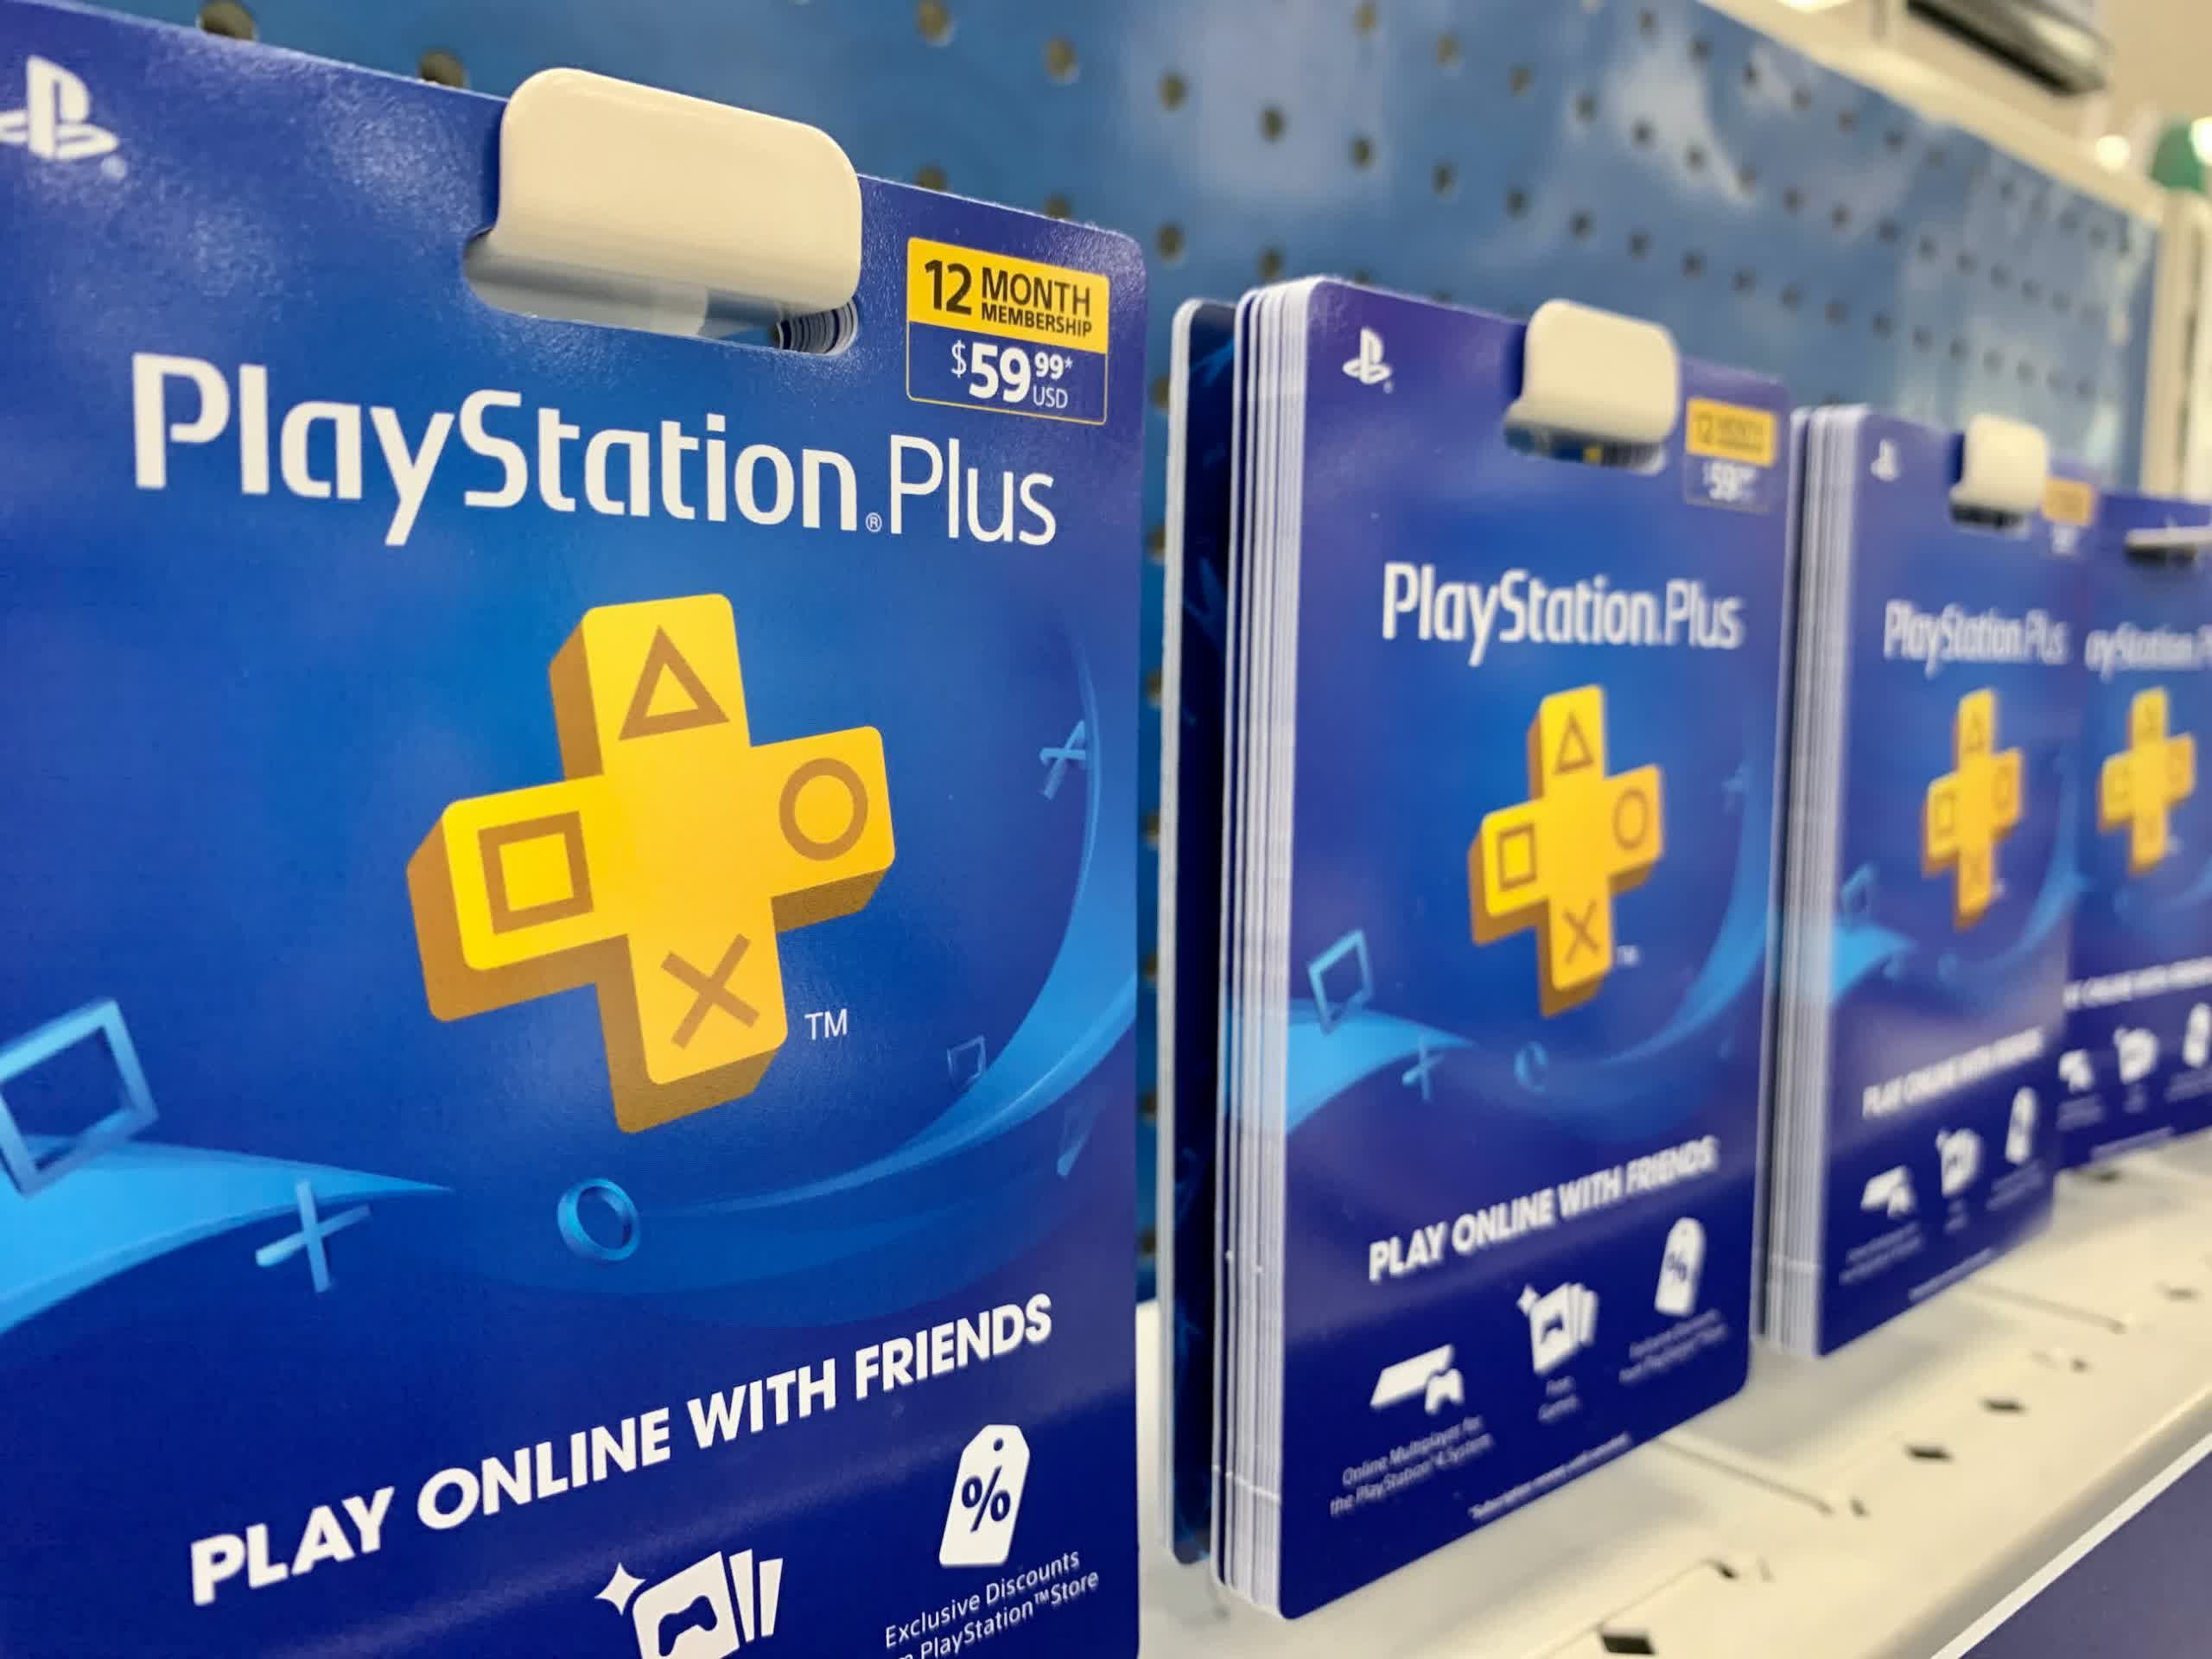 Two free games per console is returning to PlayStation Plus members again |  TechSpot